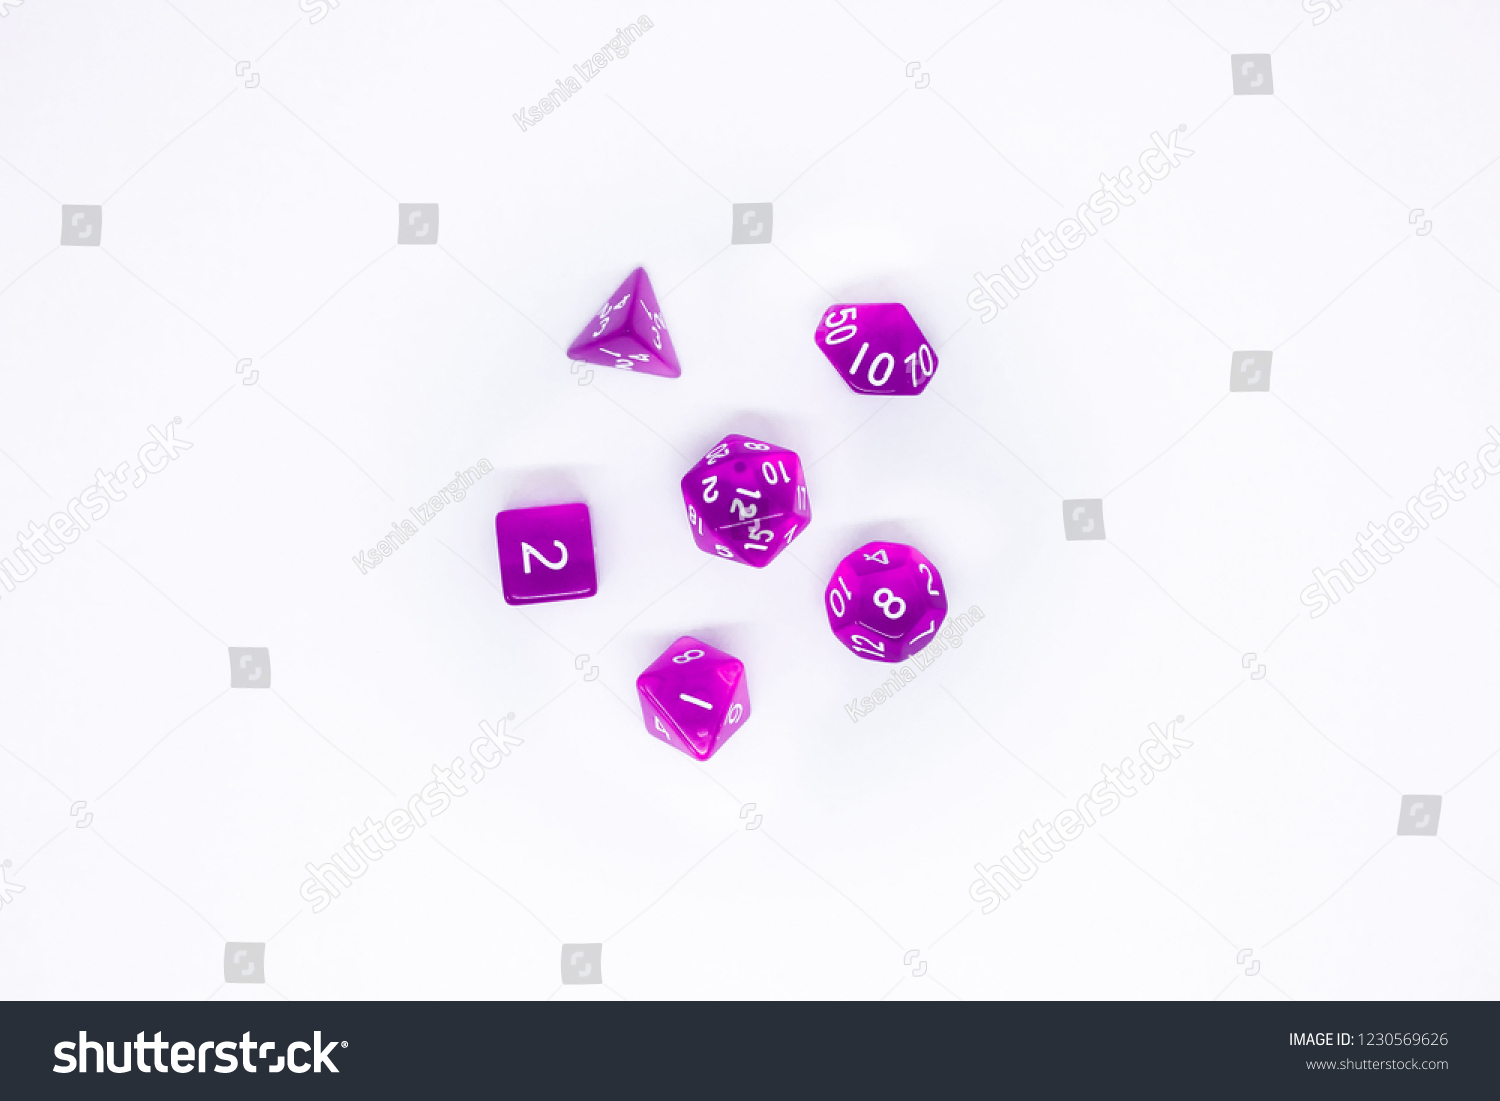 Icon set of dice for fantasy dnd and rpg tabletop games. Board game polyhedral dices with different sides isolated on white background #1230569626